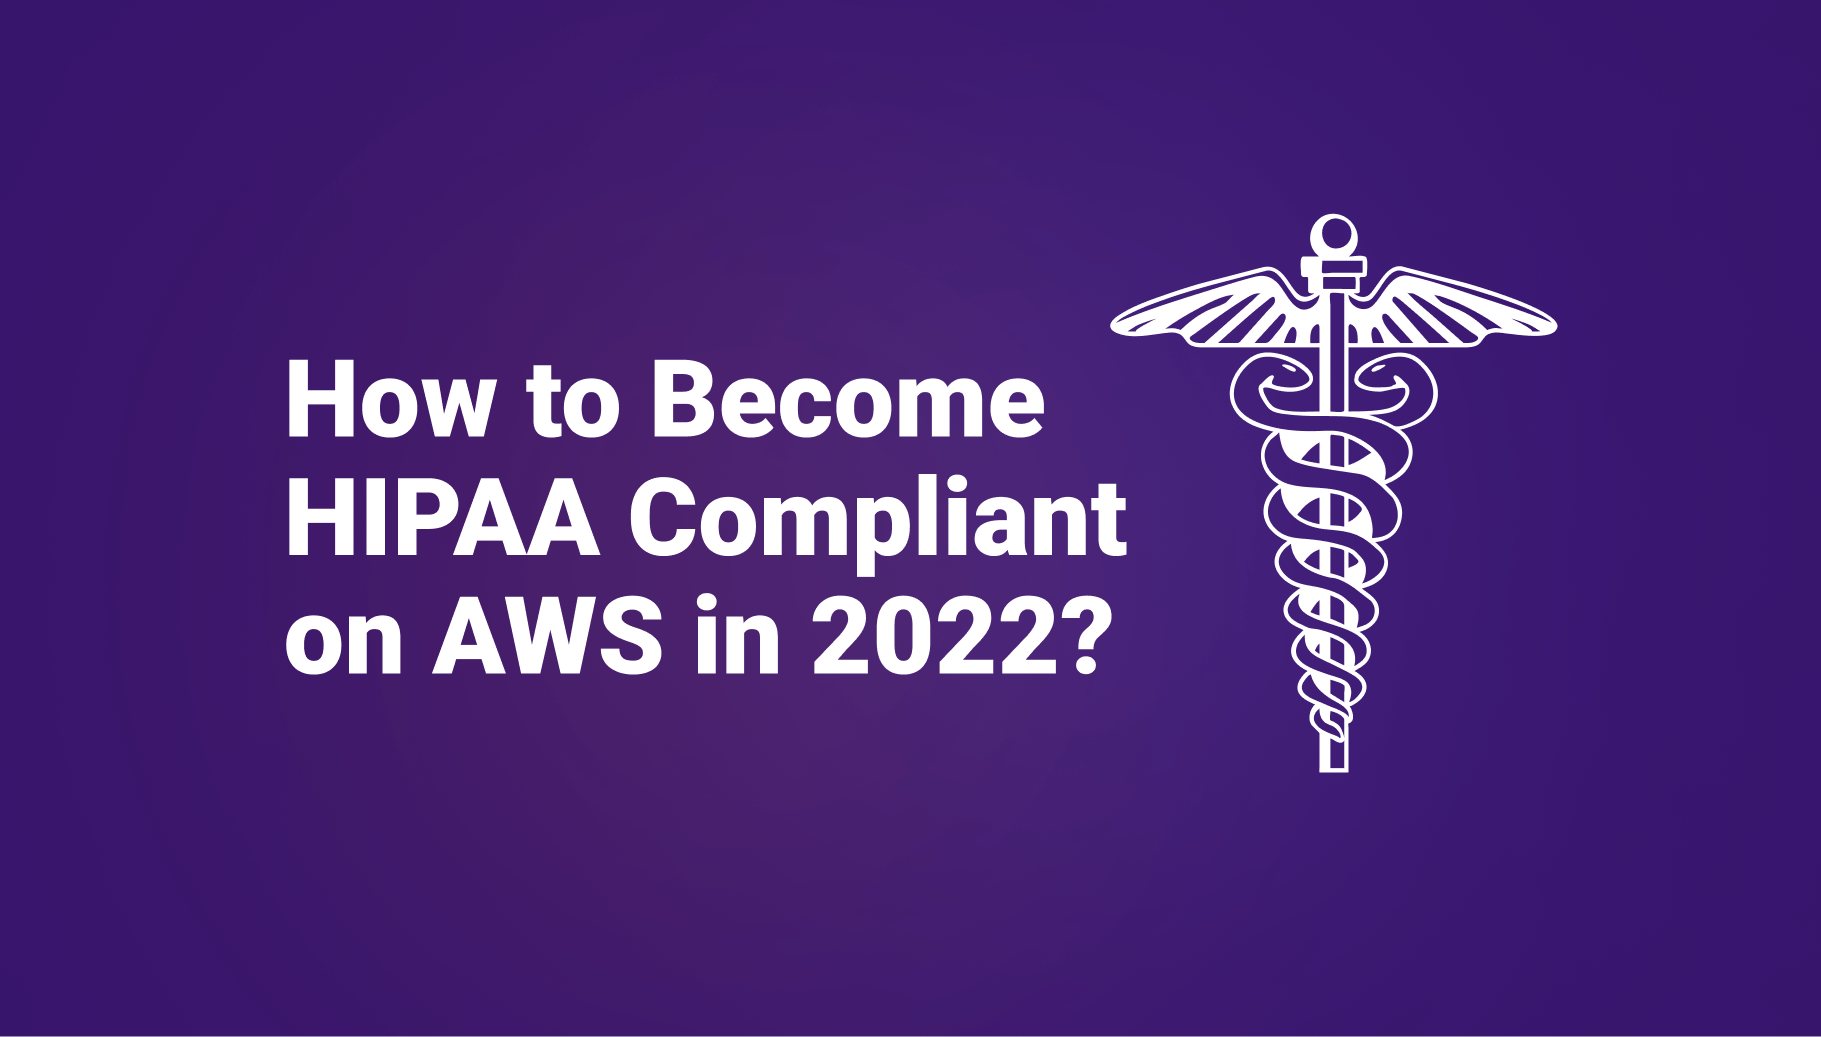 How to become HIPAA compliant on AWS in 2022? - Qovery